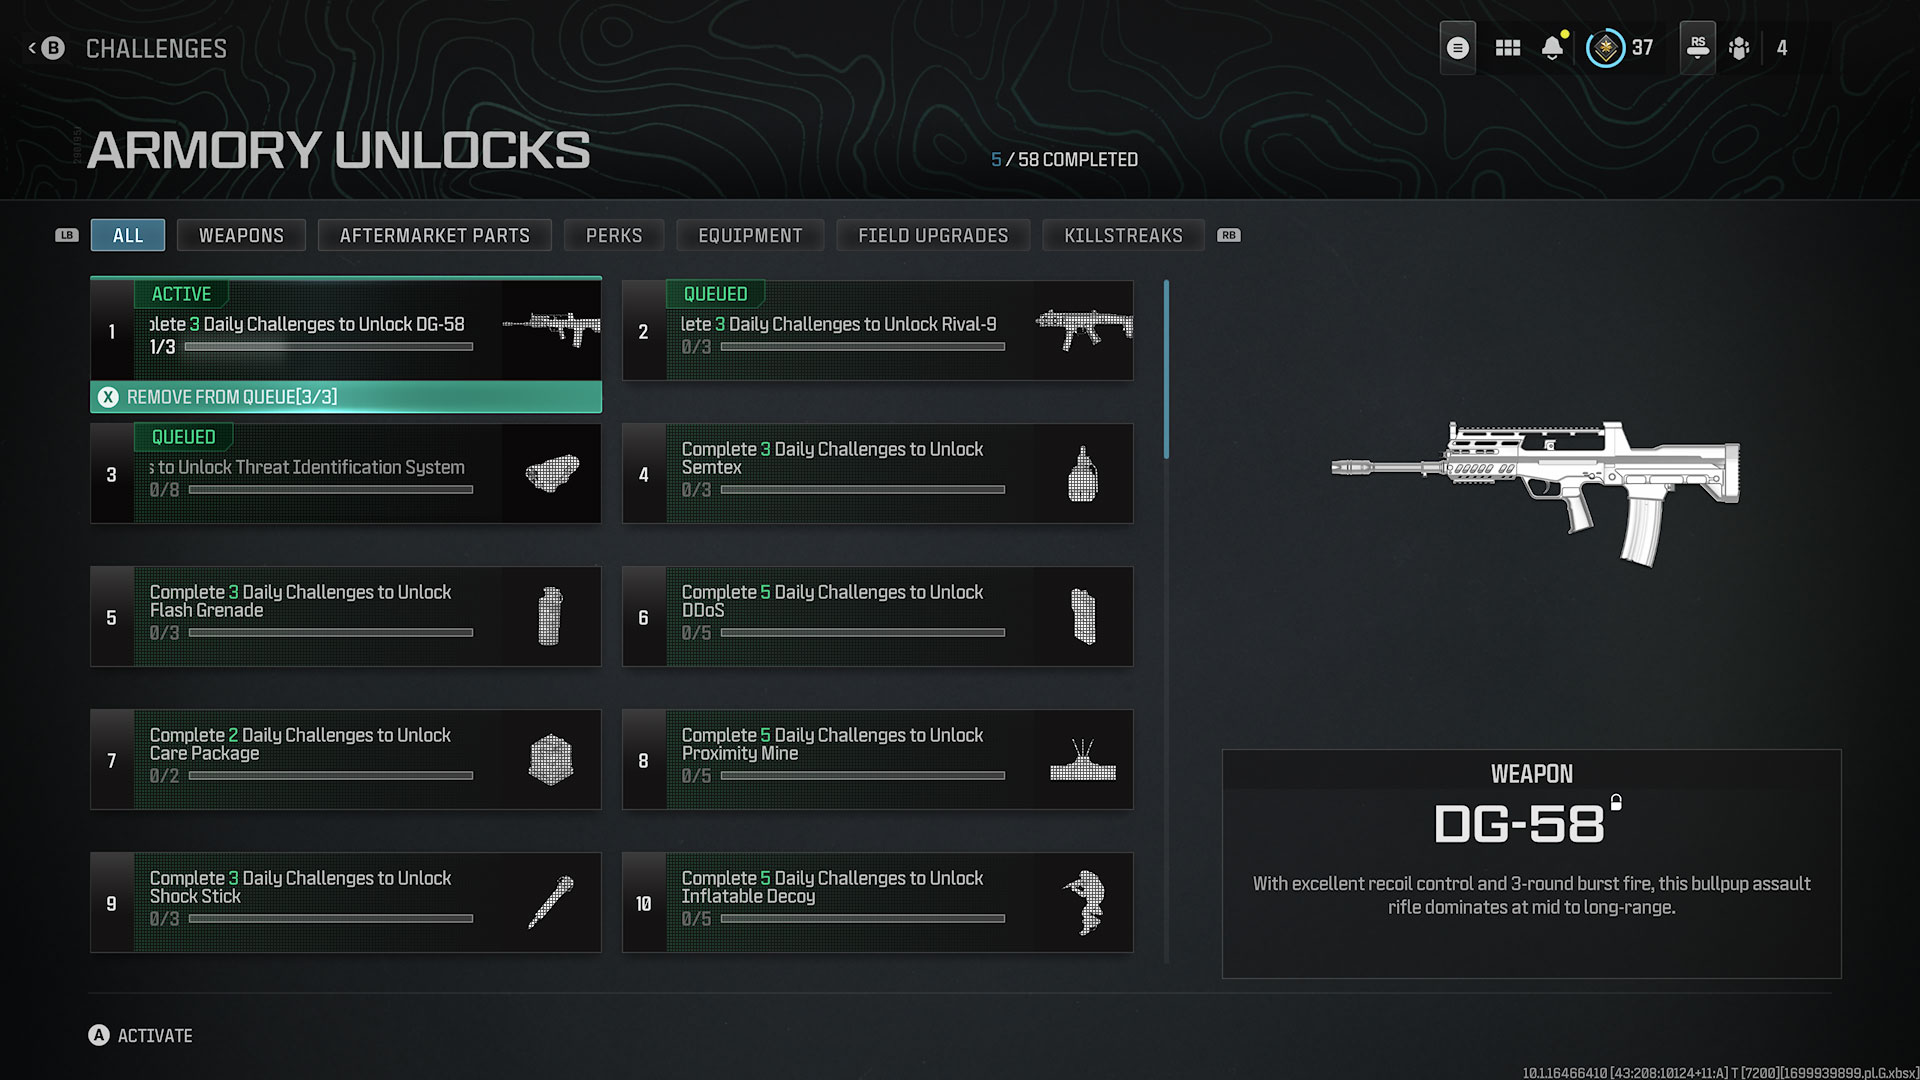 MW3 Arsenal: all weapons available at launch on November 10 and